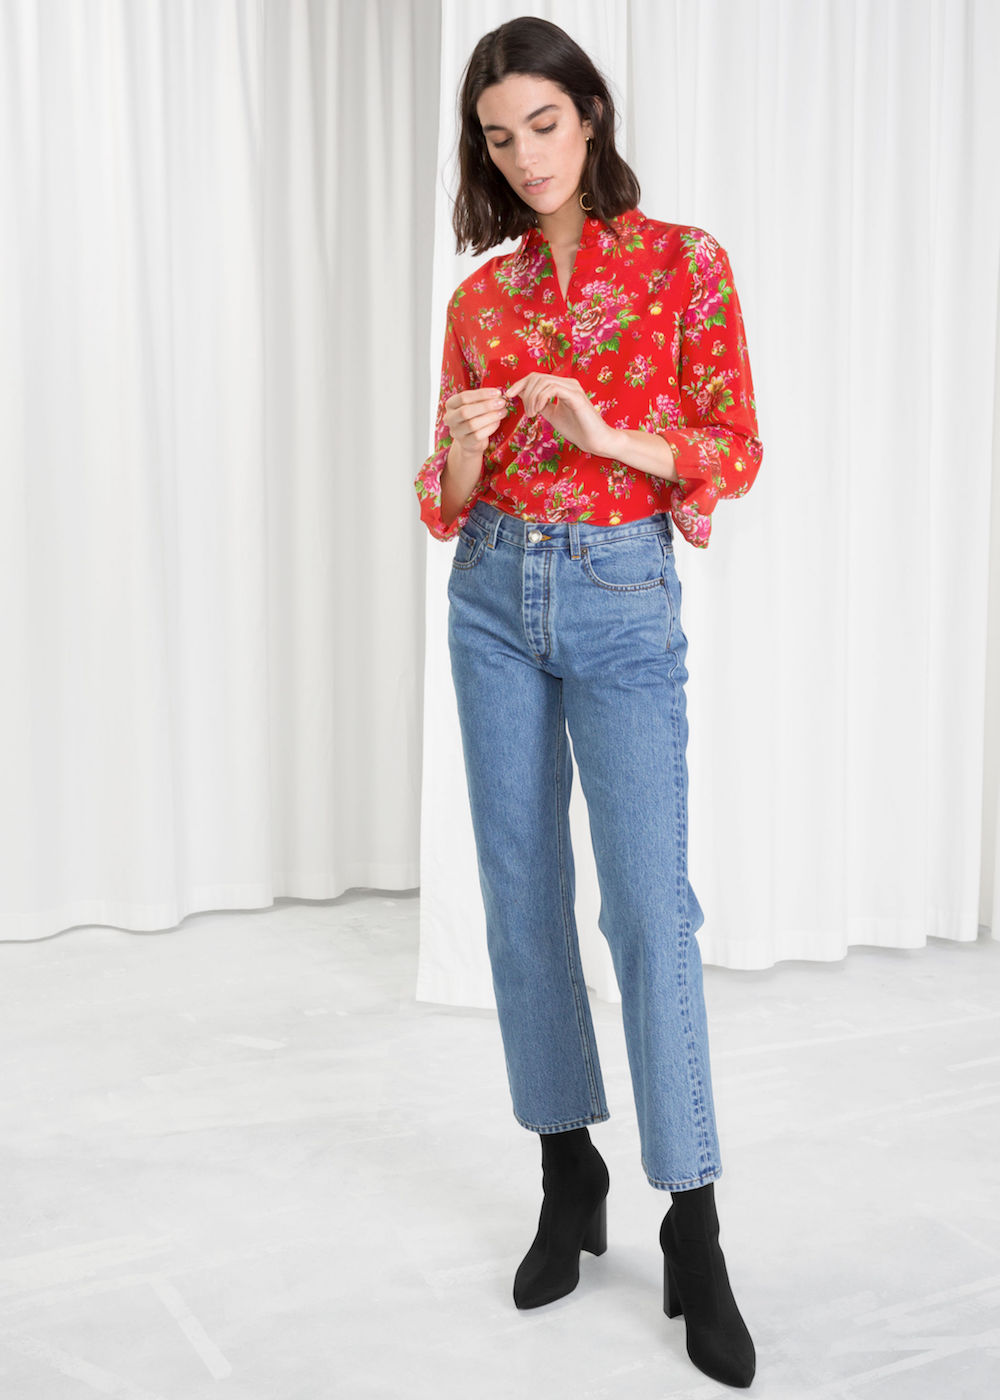 Denim Trends: 7 Styles Set to Dominate Fall 2018 - theFashionSpot